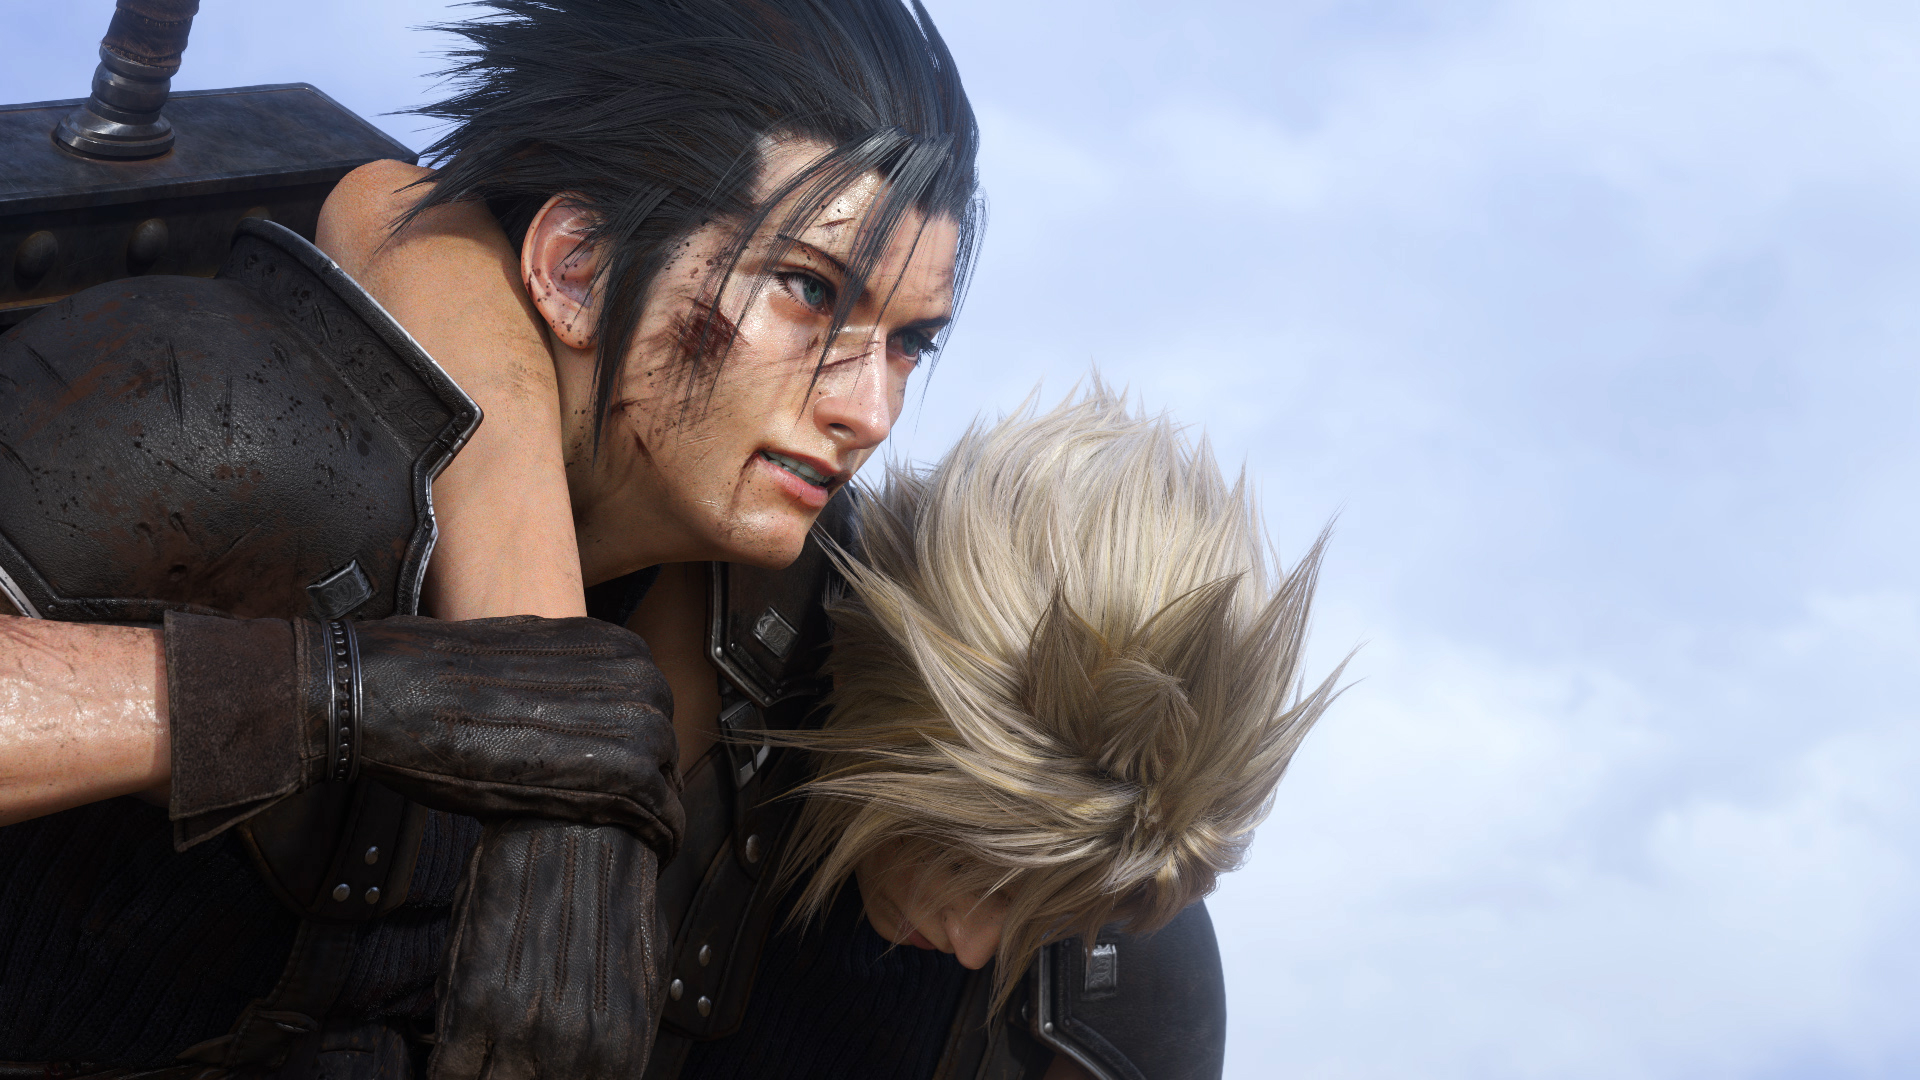 cloud and tifa fanfiction